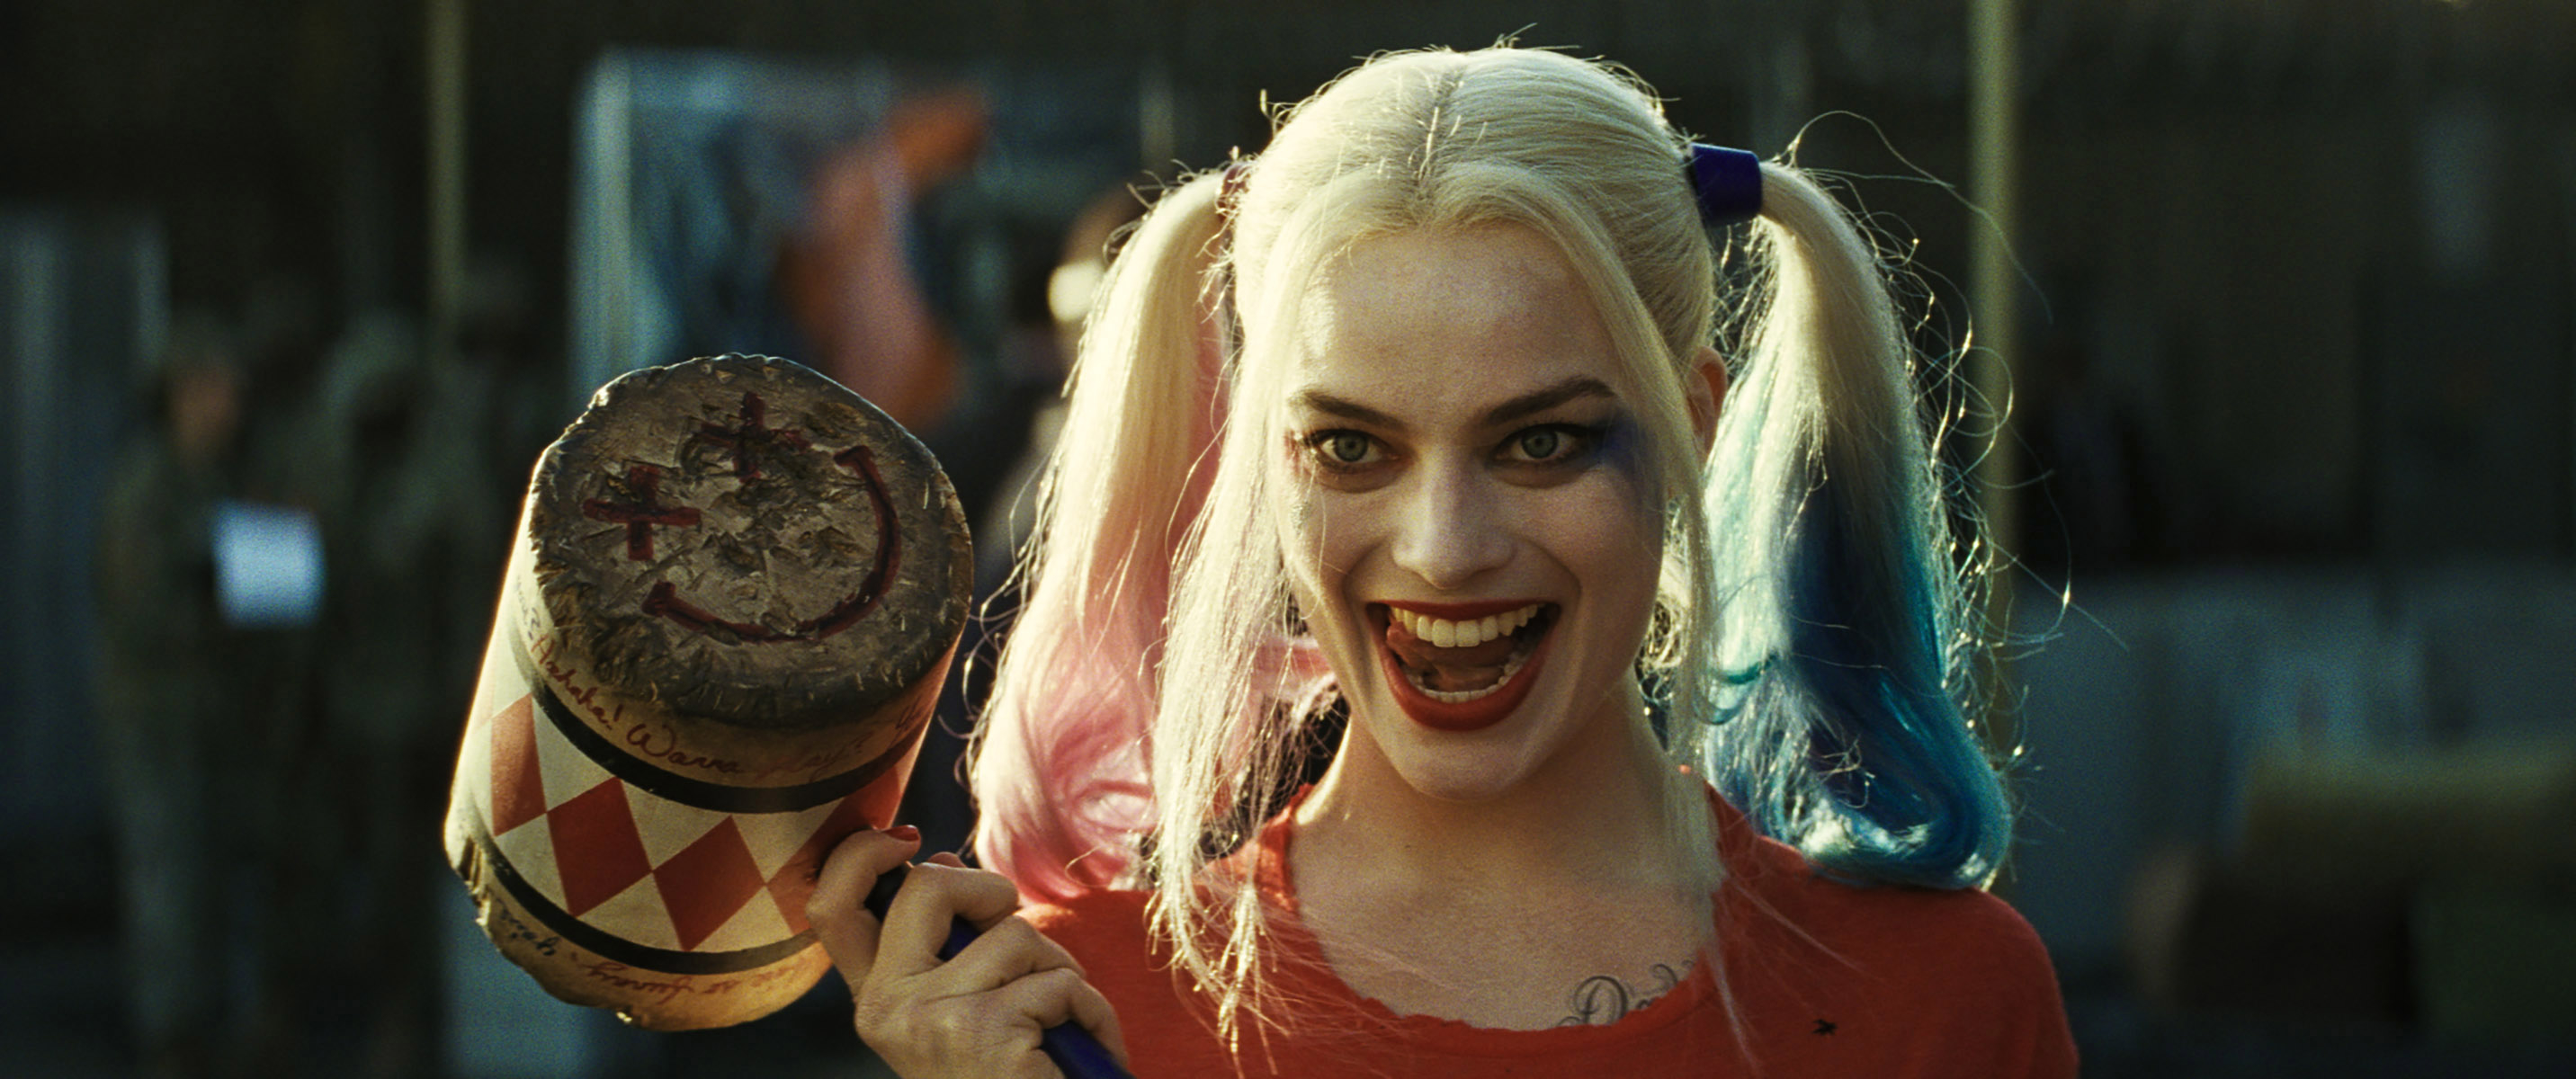 Harley Quinn holds a mallet, wearing pigtails and a mischievous smile